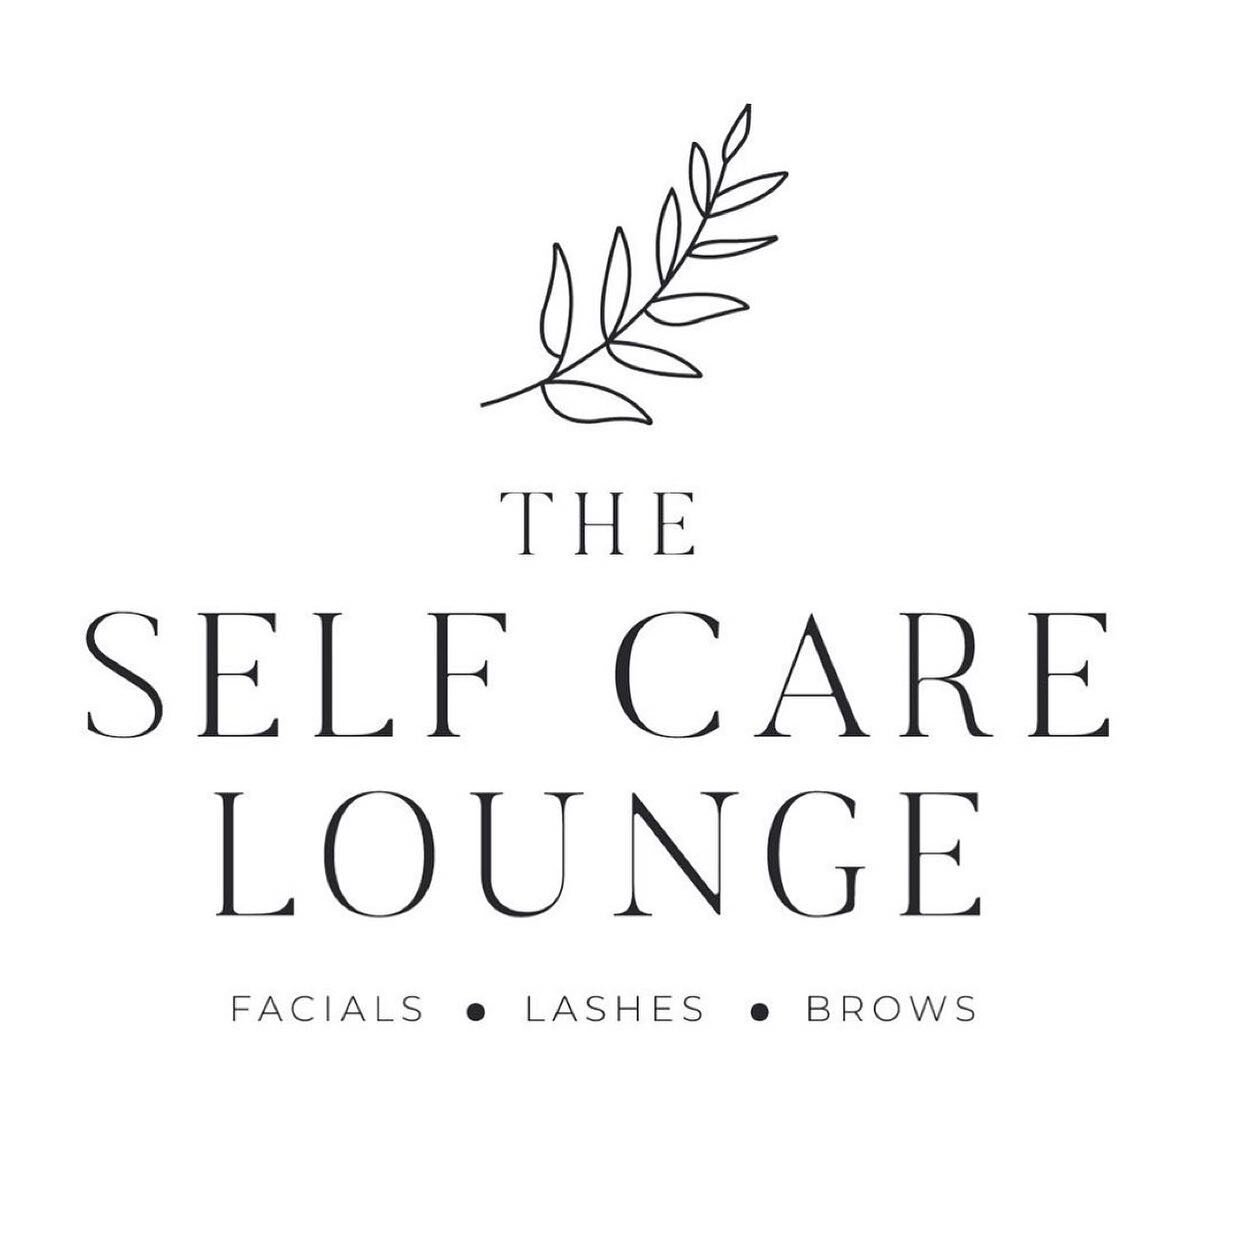 Check out Chelsea! Our new aesthetician and will be lashes, facials, and brows!!! She is going to be a huge part of our team!! 

Repost from @selfcareloungeboca
&bull;
Hey guys, Its me, Chelsea! (formerly skin by Chels) I am so so sooo excited to fin